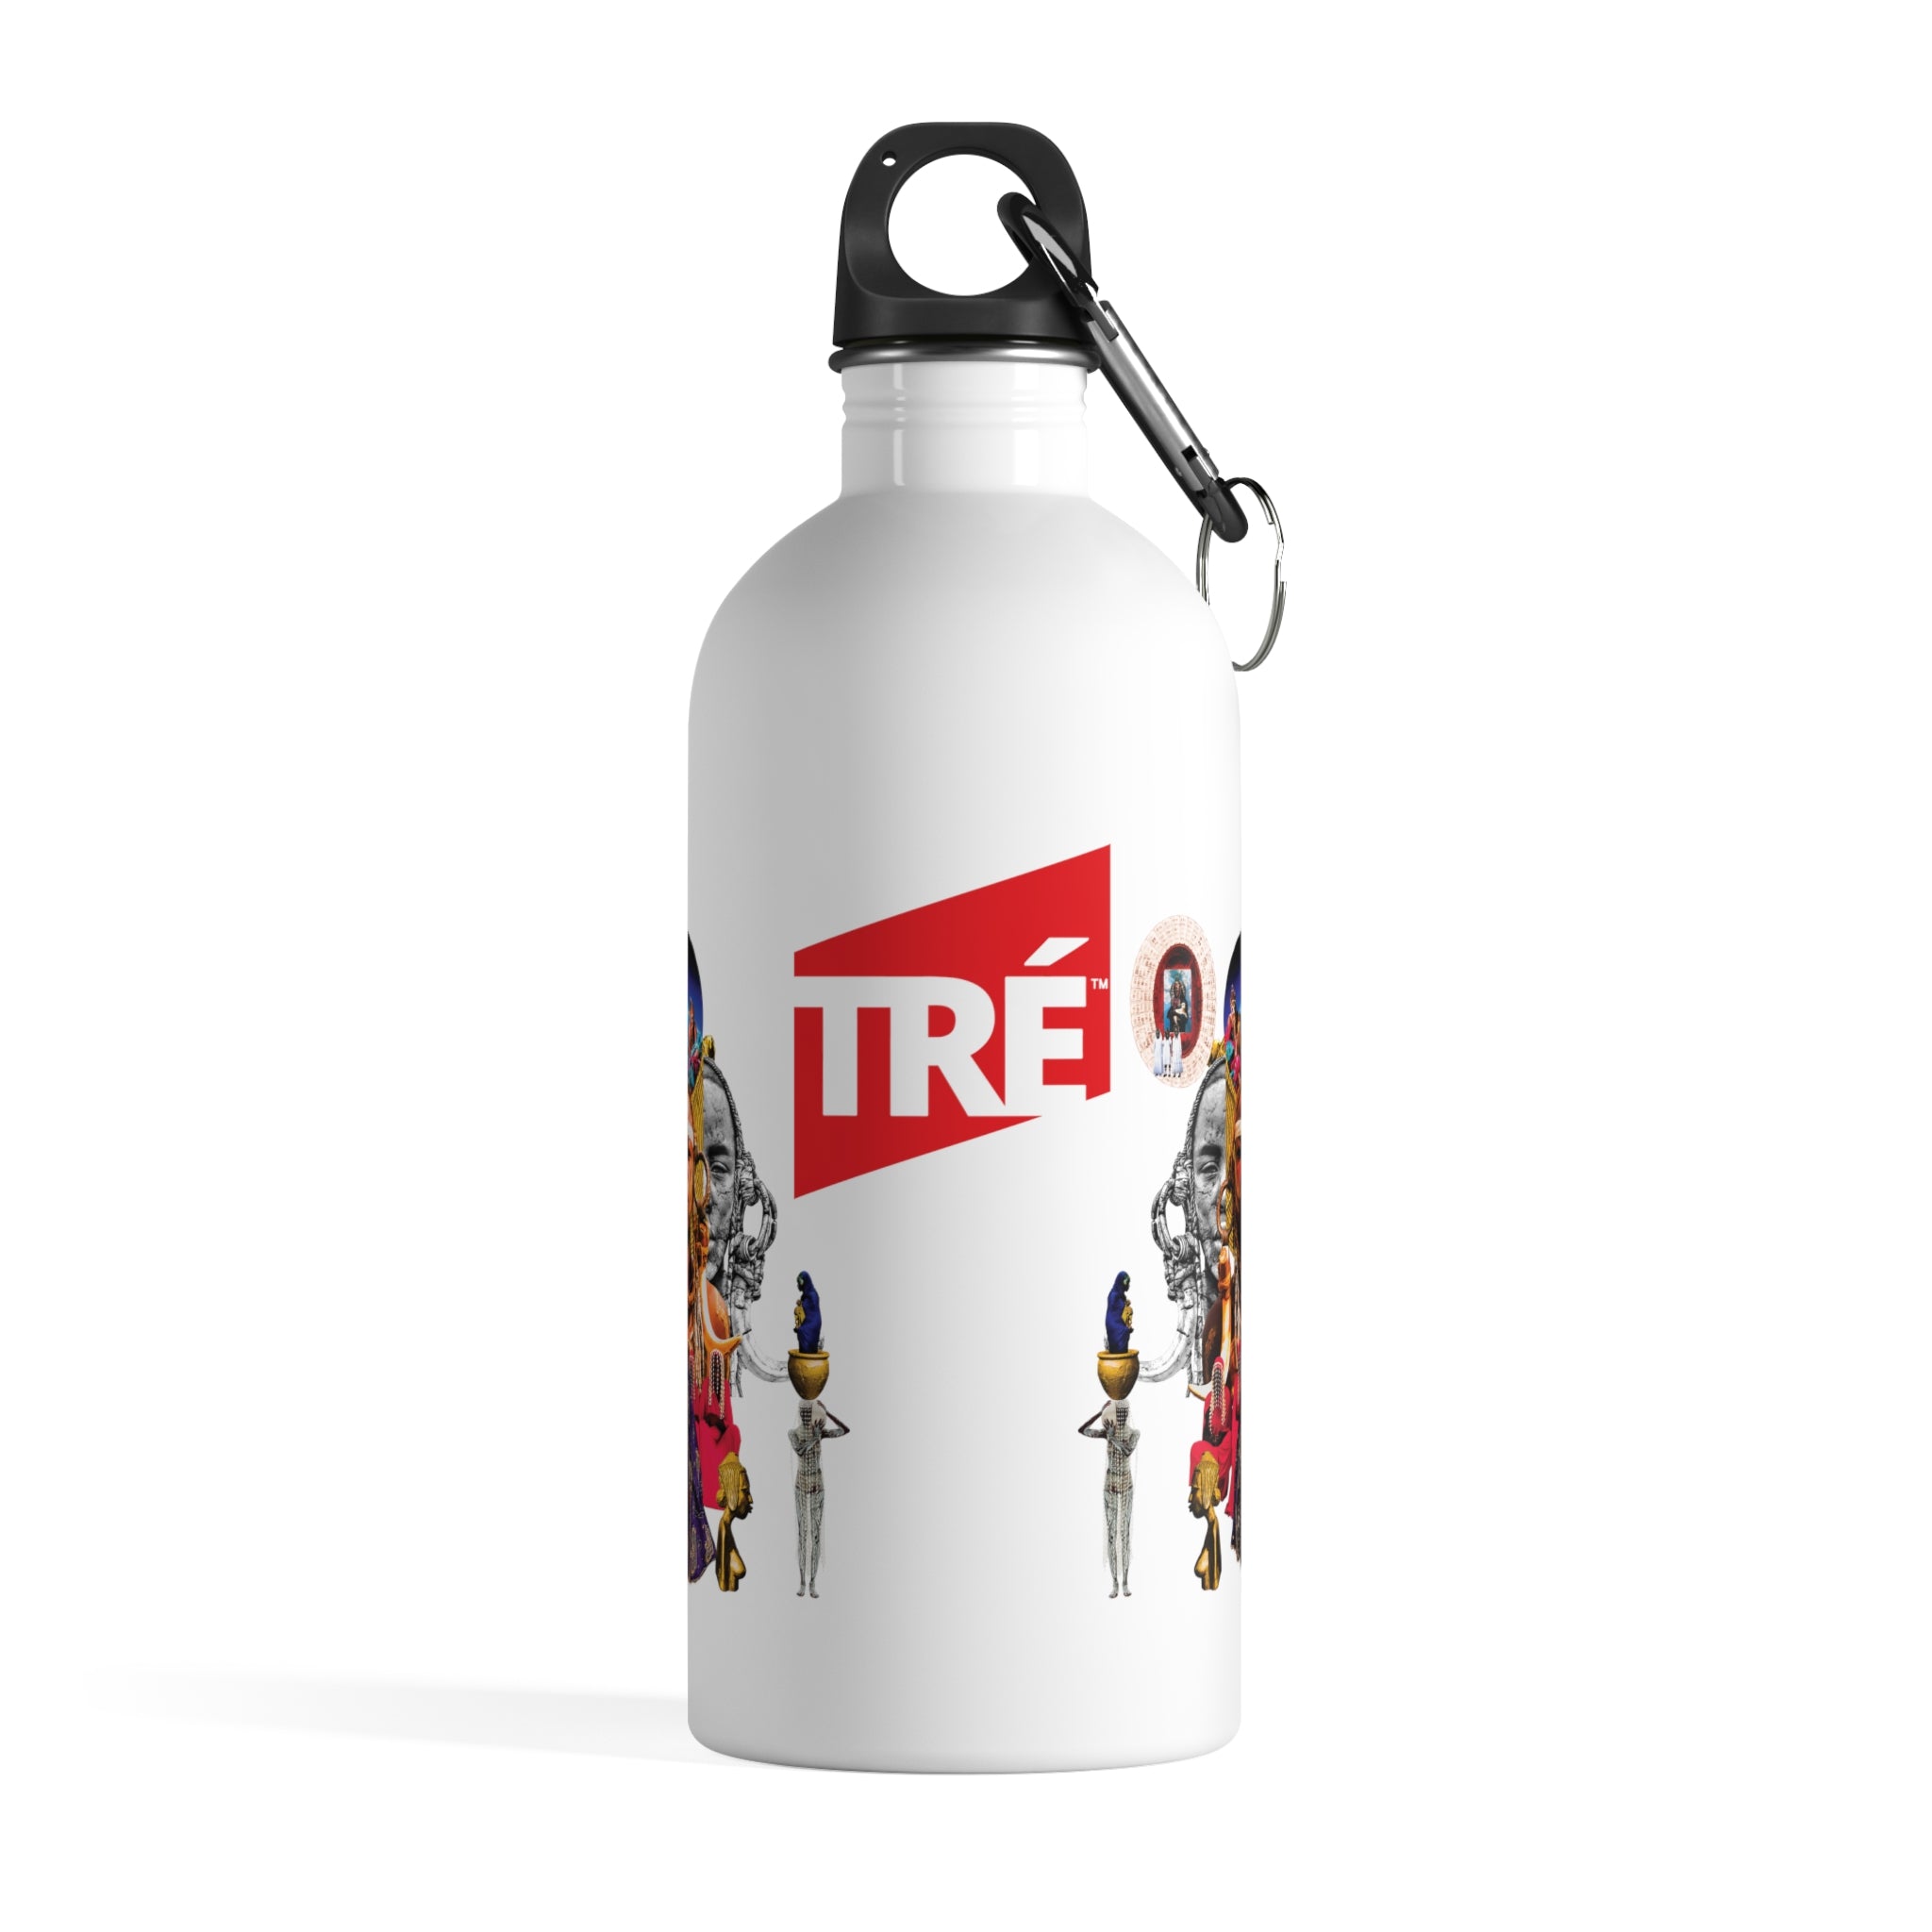 Stainless Steel Water Bottle, Holy Grail